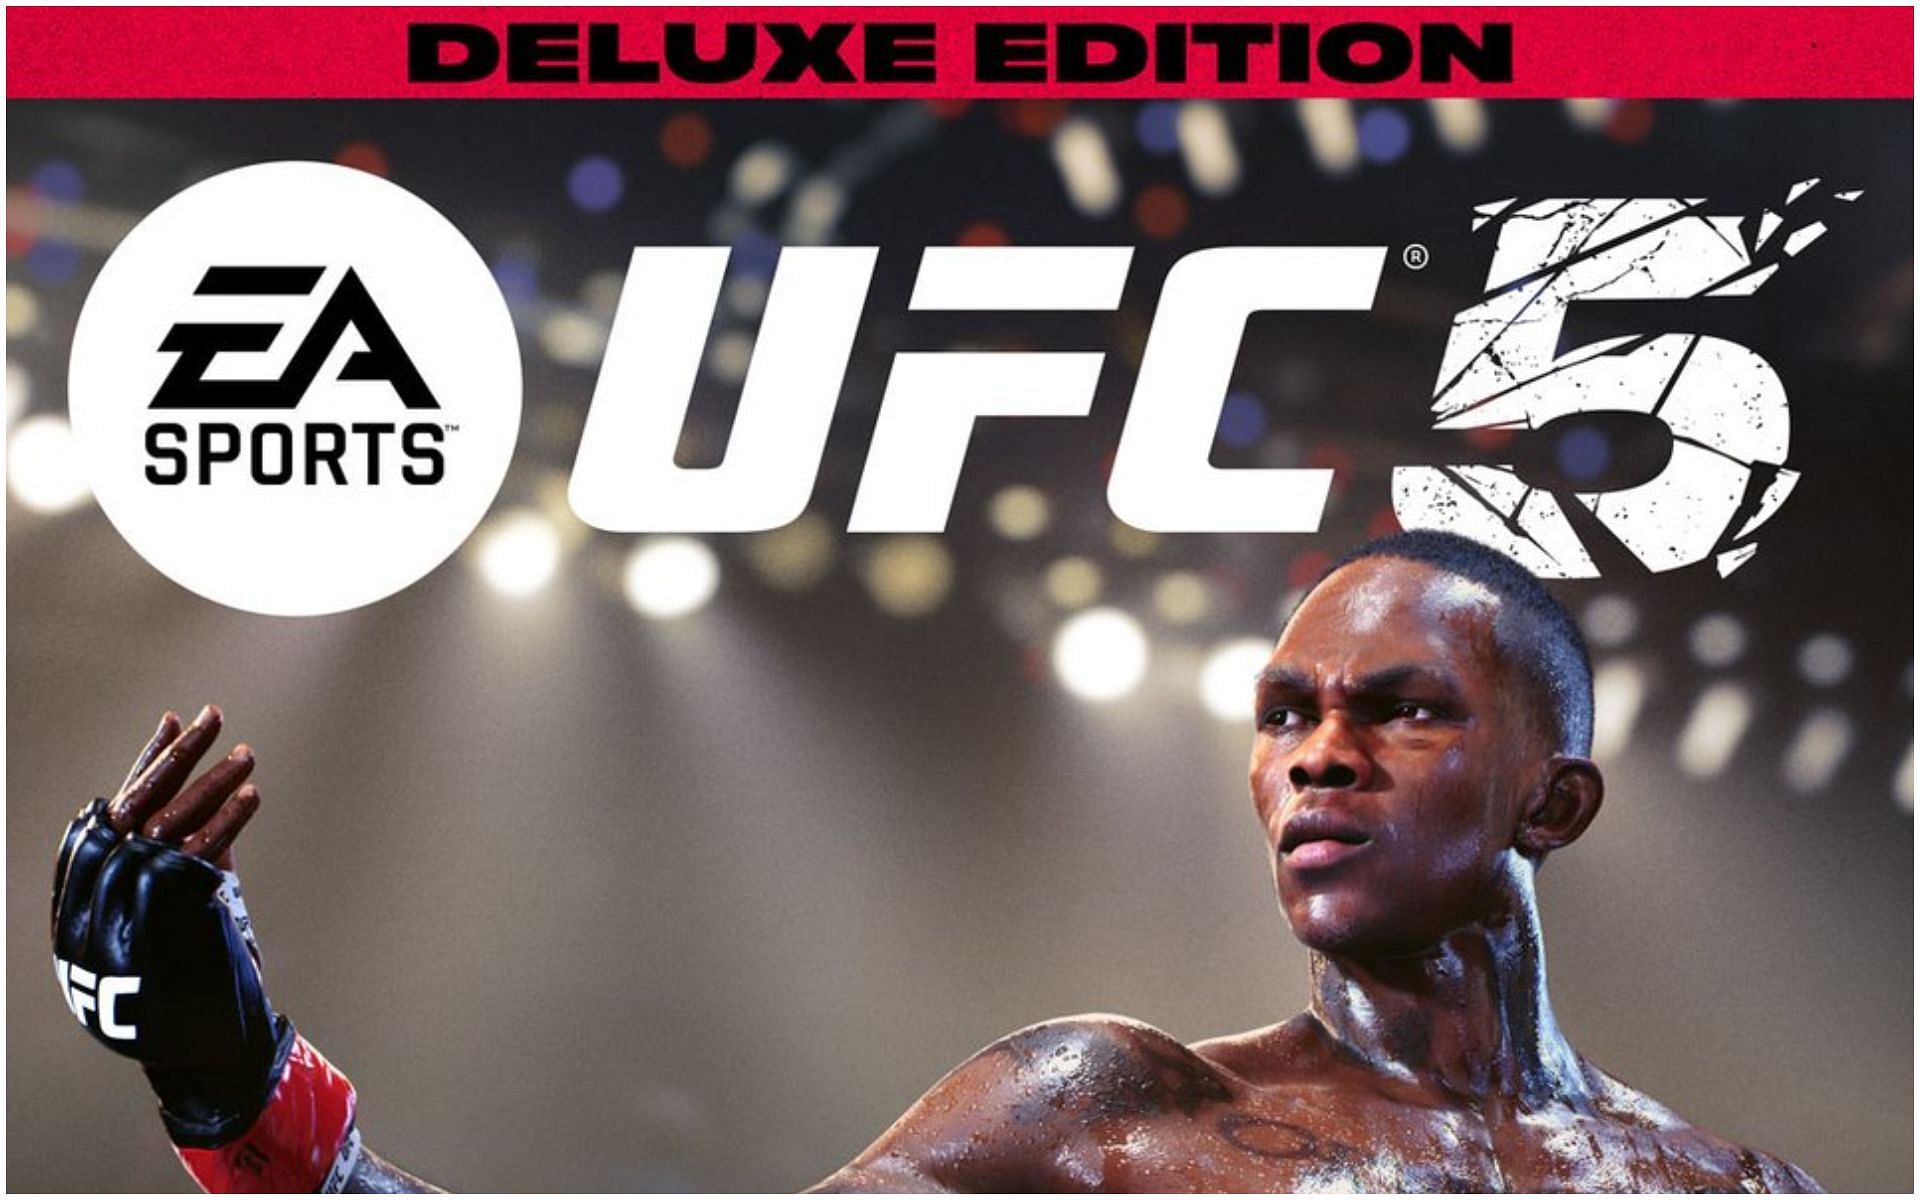 Israel Adesanya on EA Sports UFC 5 Deluxe Edition cover